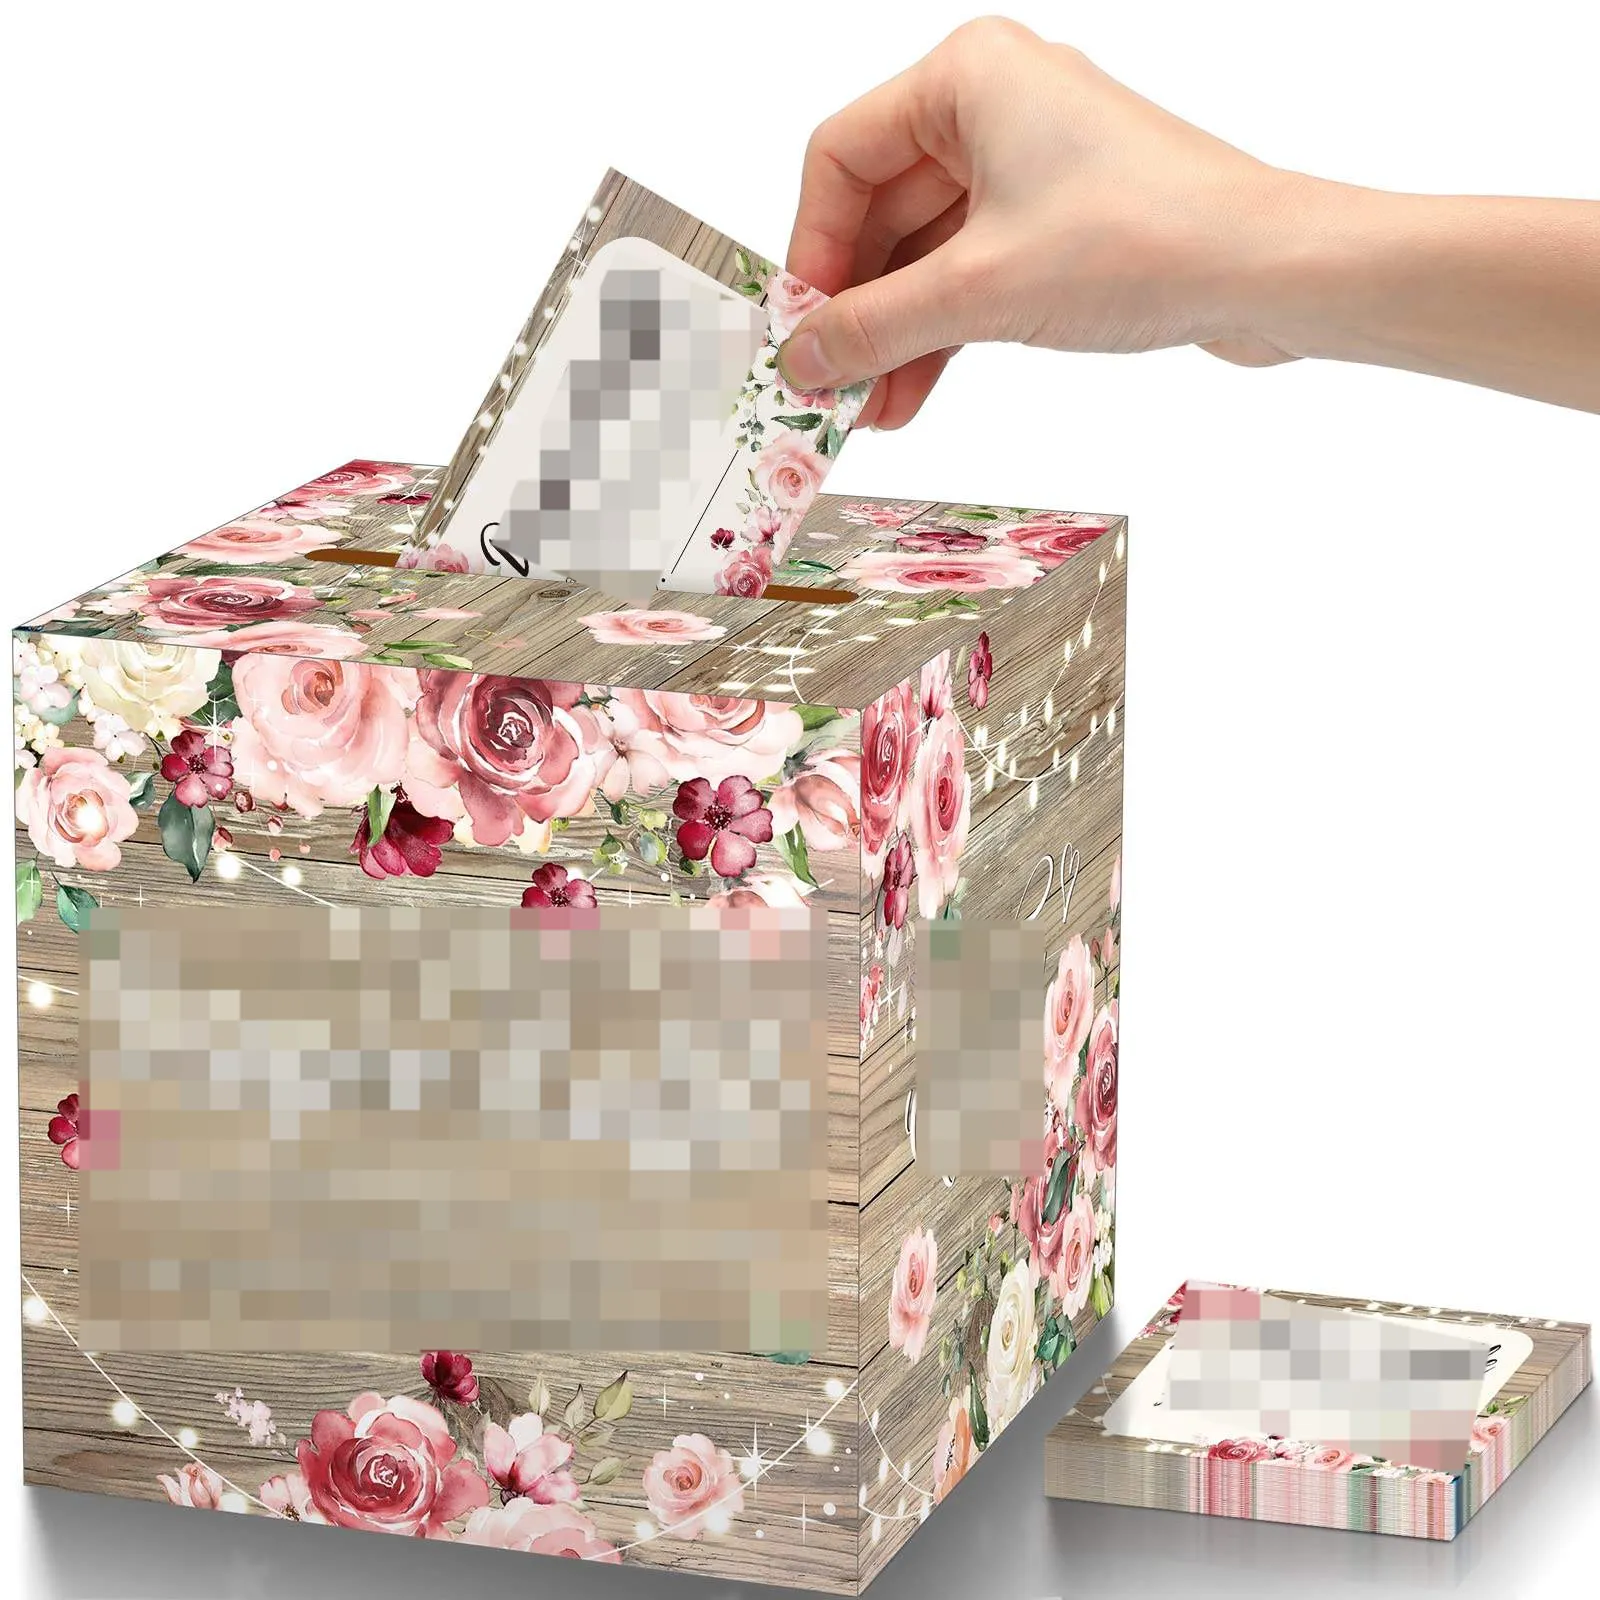 Floral Raffle Tickets with Card Box for Raffle Sign Floral Game Insert Card Games for Bring